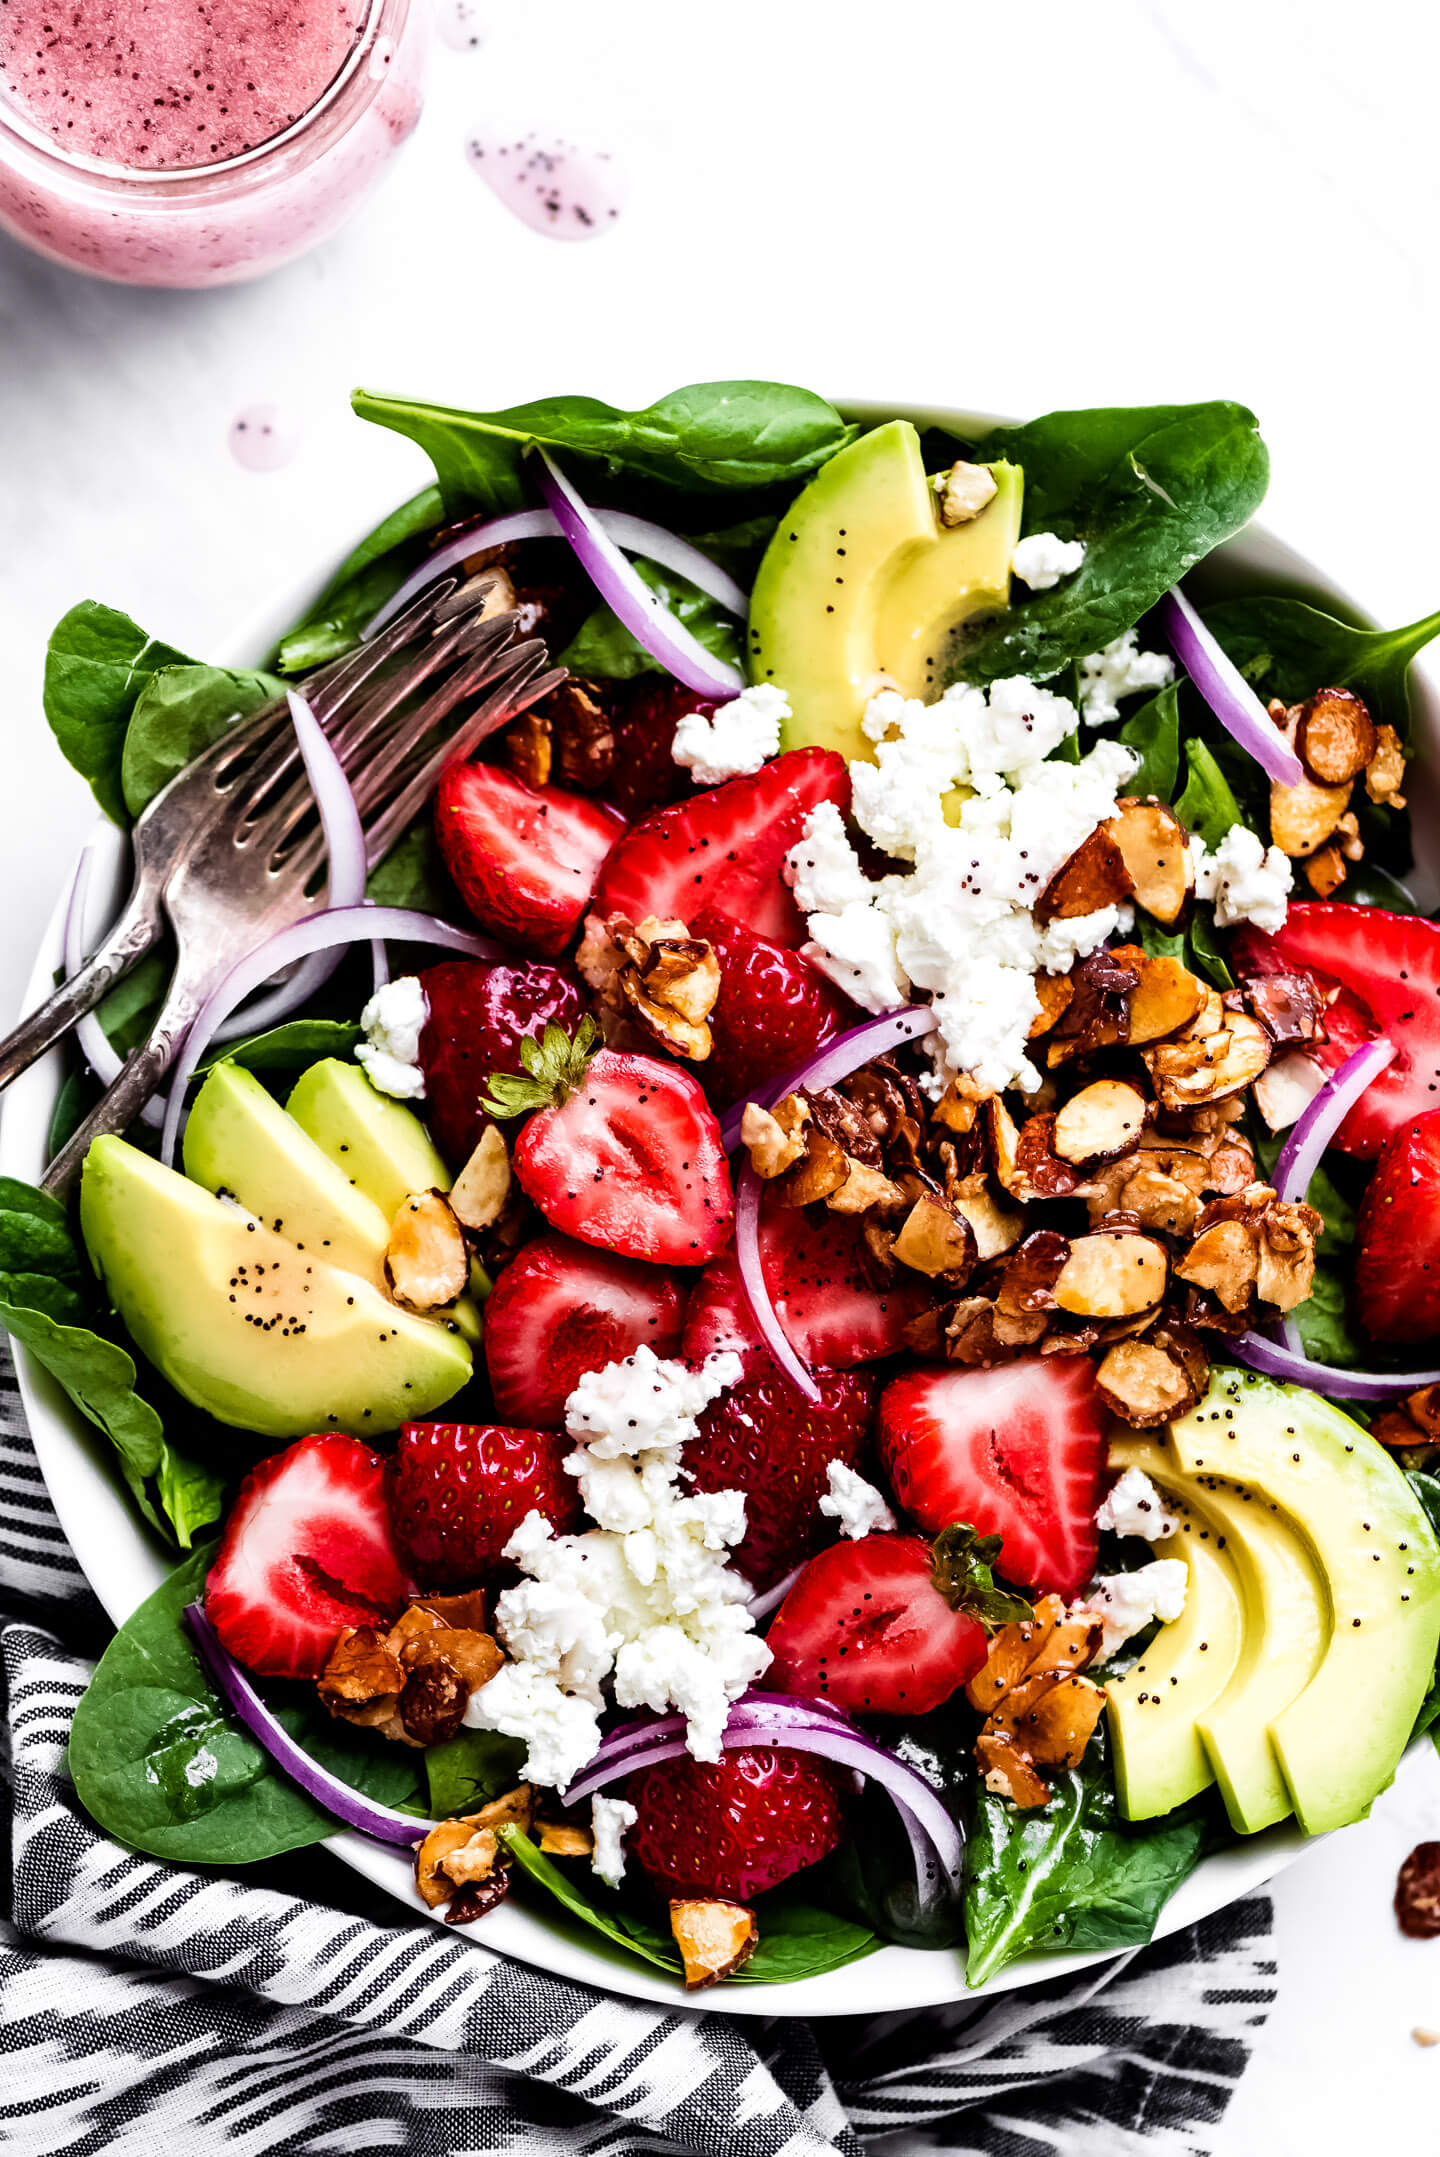 Strawberry Salad with avocado, candied almonds, goat cheese, red onion, and baby spinach.